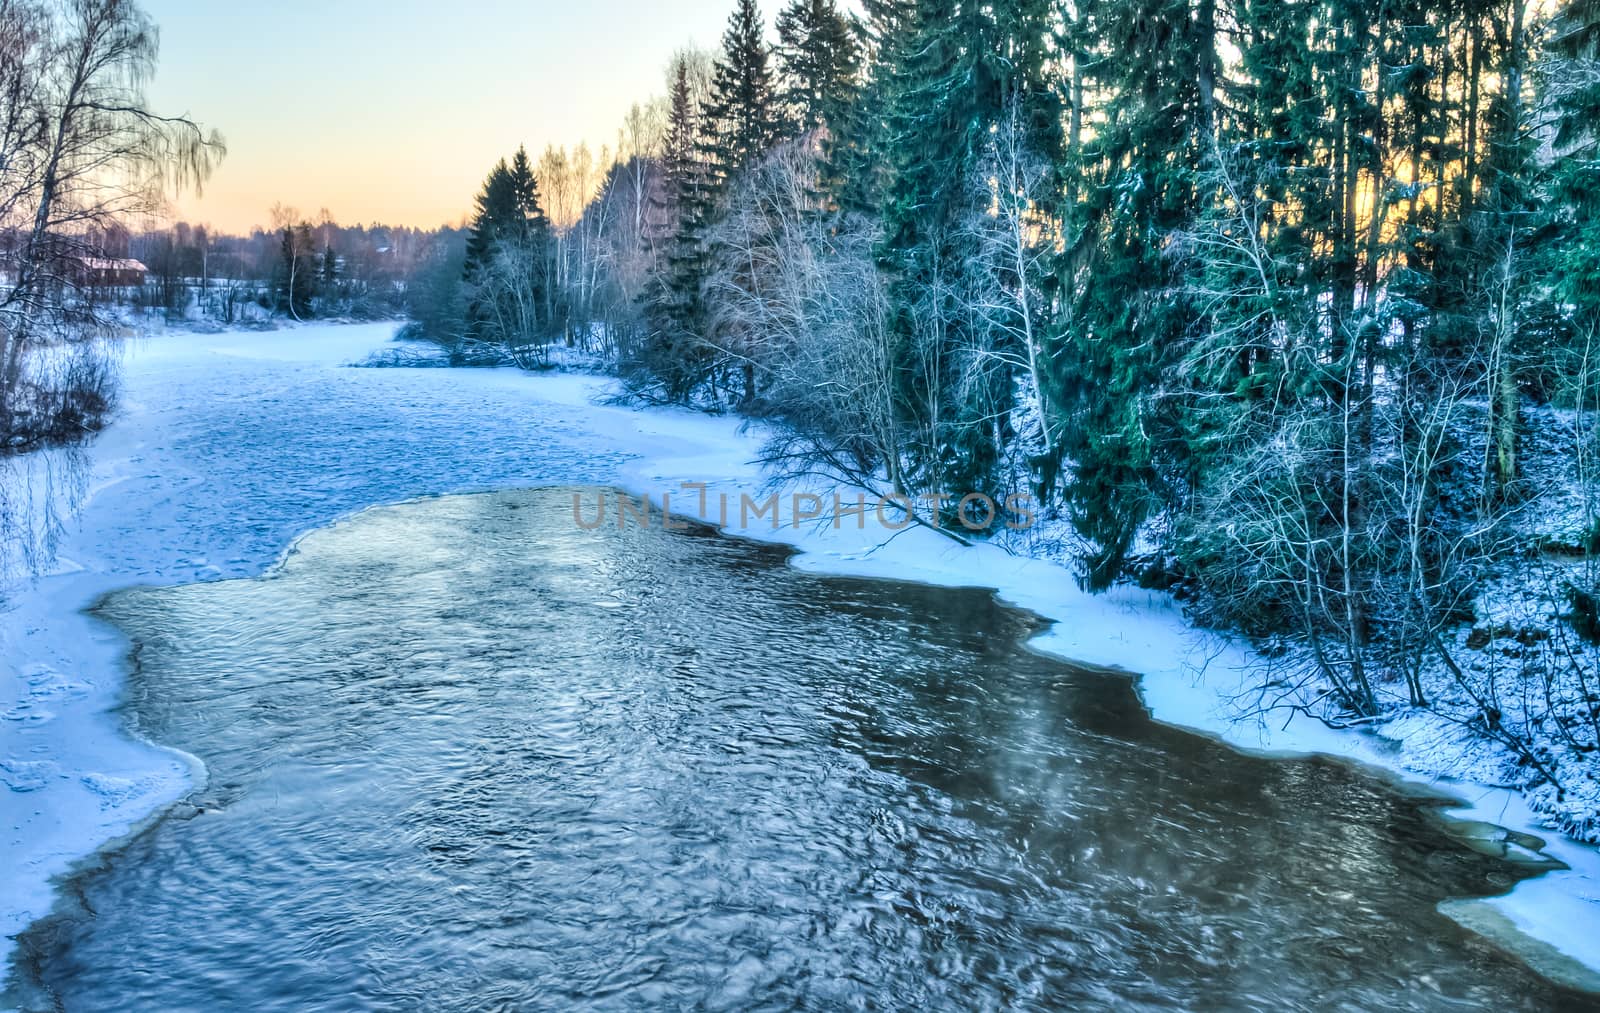 Icy winter river flowing in the evening sun